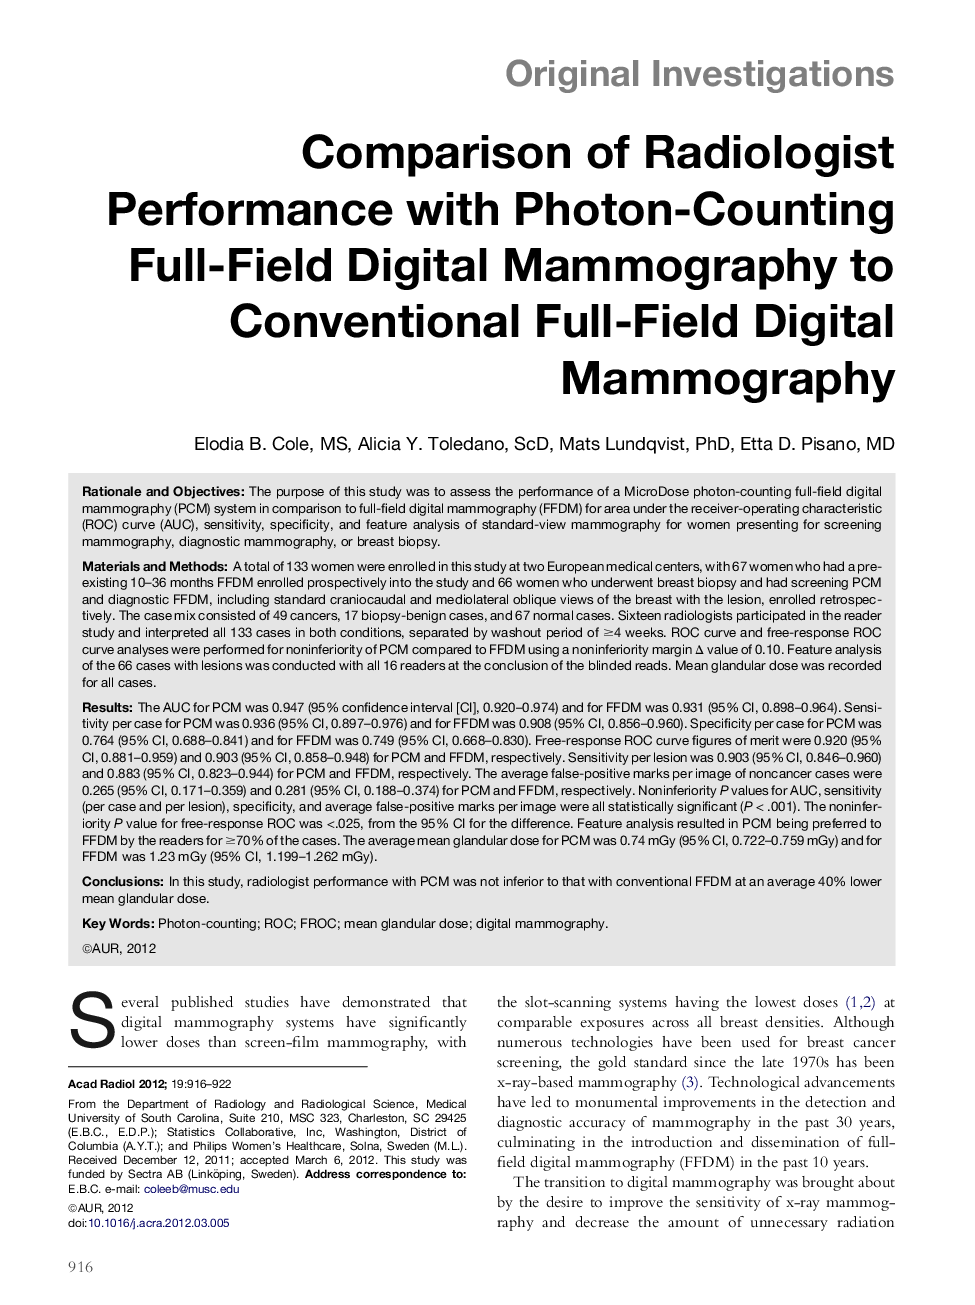 Comparison of Radiologist Performance with Photon-Counting Full-Field Digital Mammography to Conventional Full-Field Digital Mammography